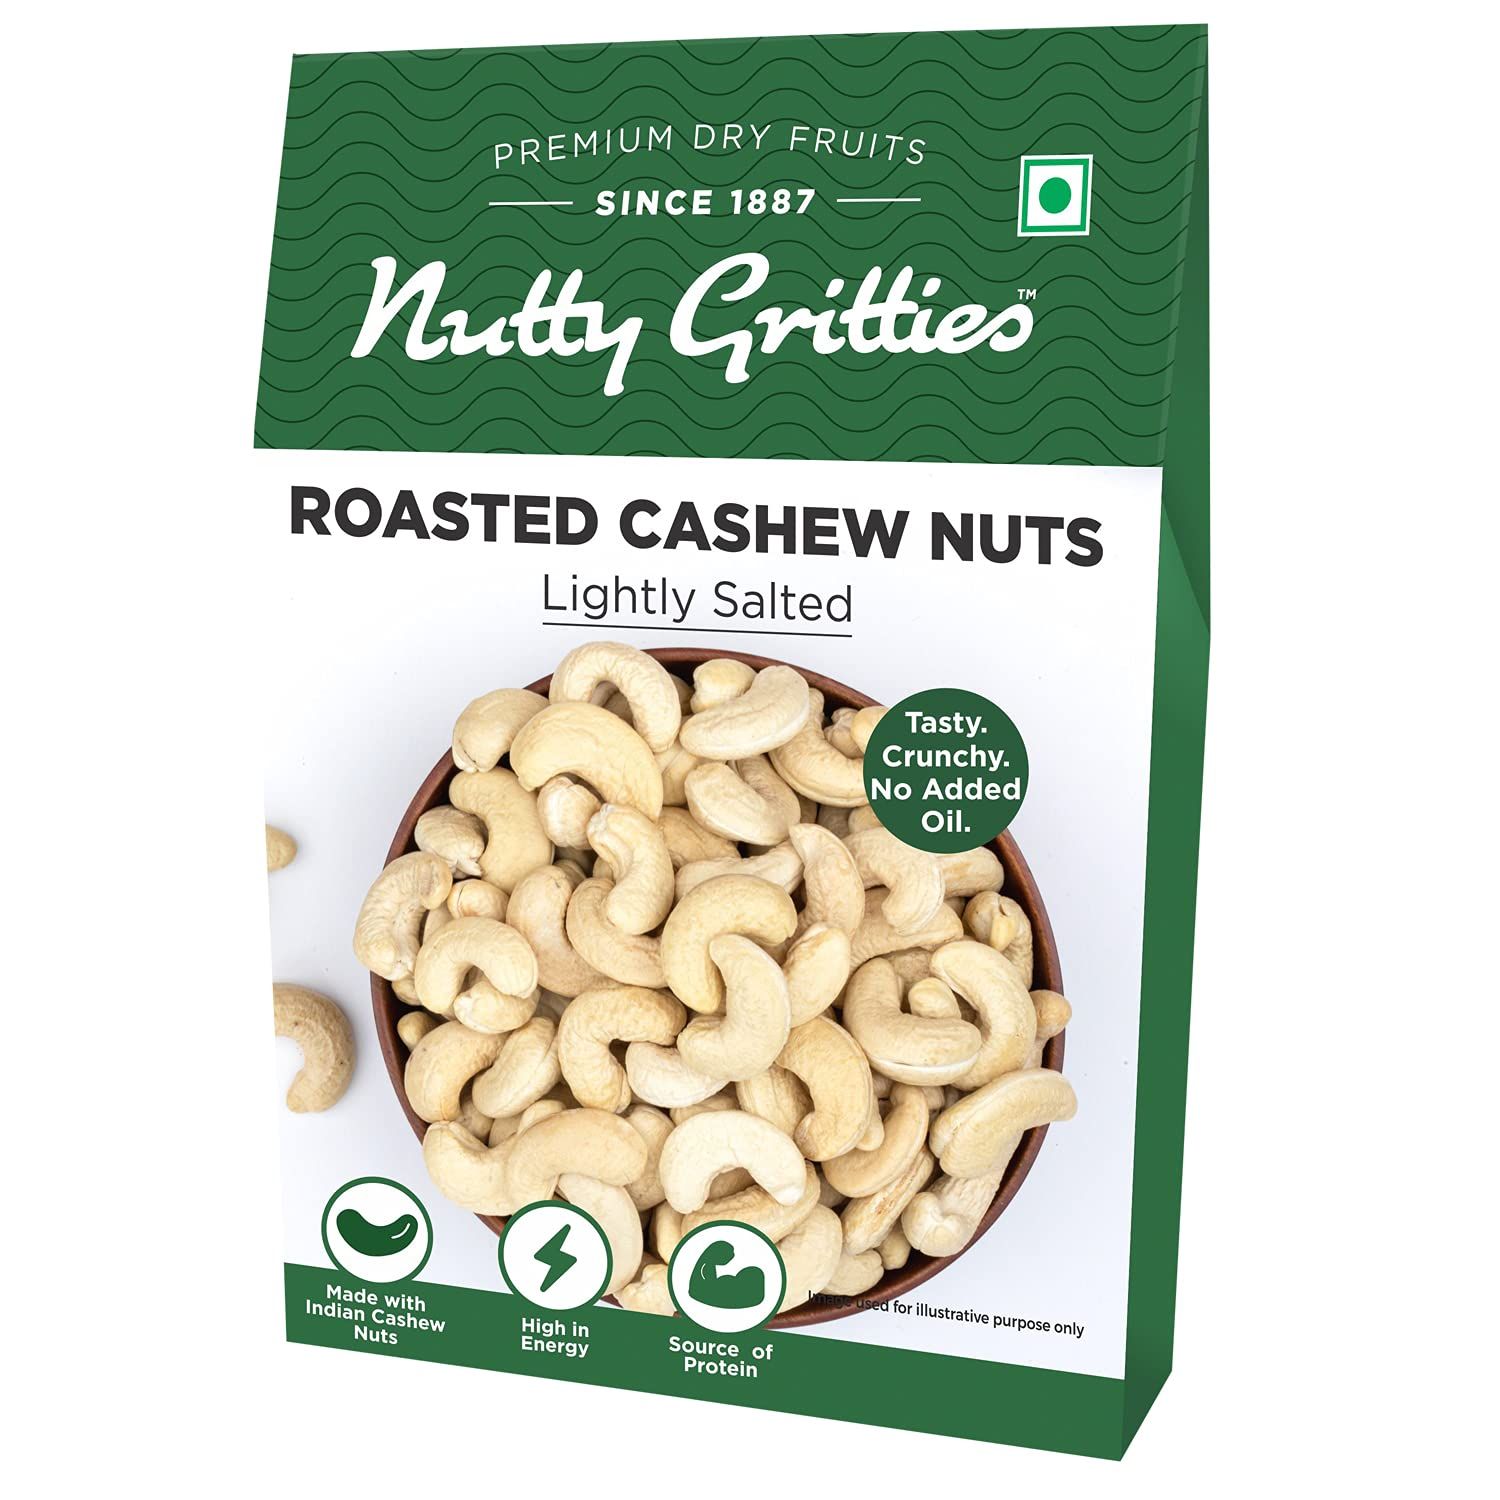 Nutty Gritties Roasted Cashew Nuts Image